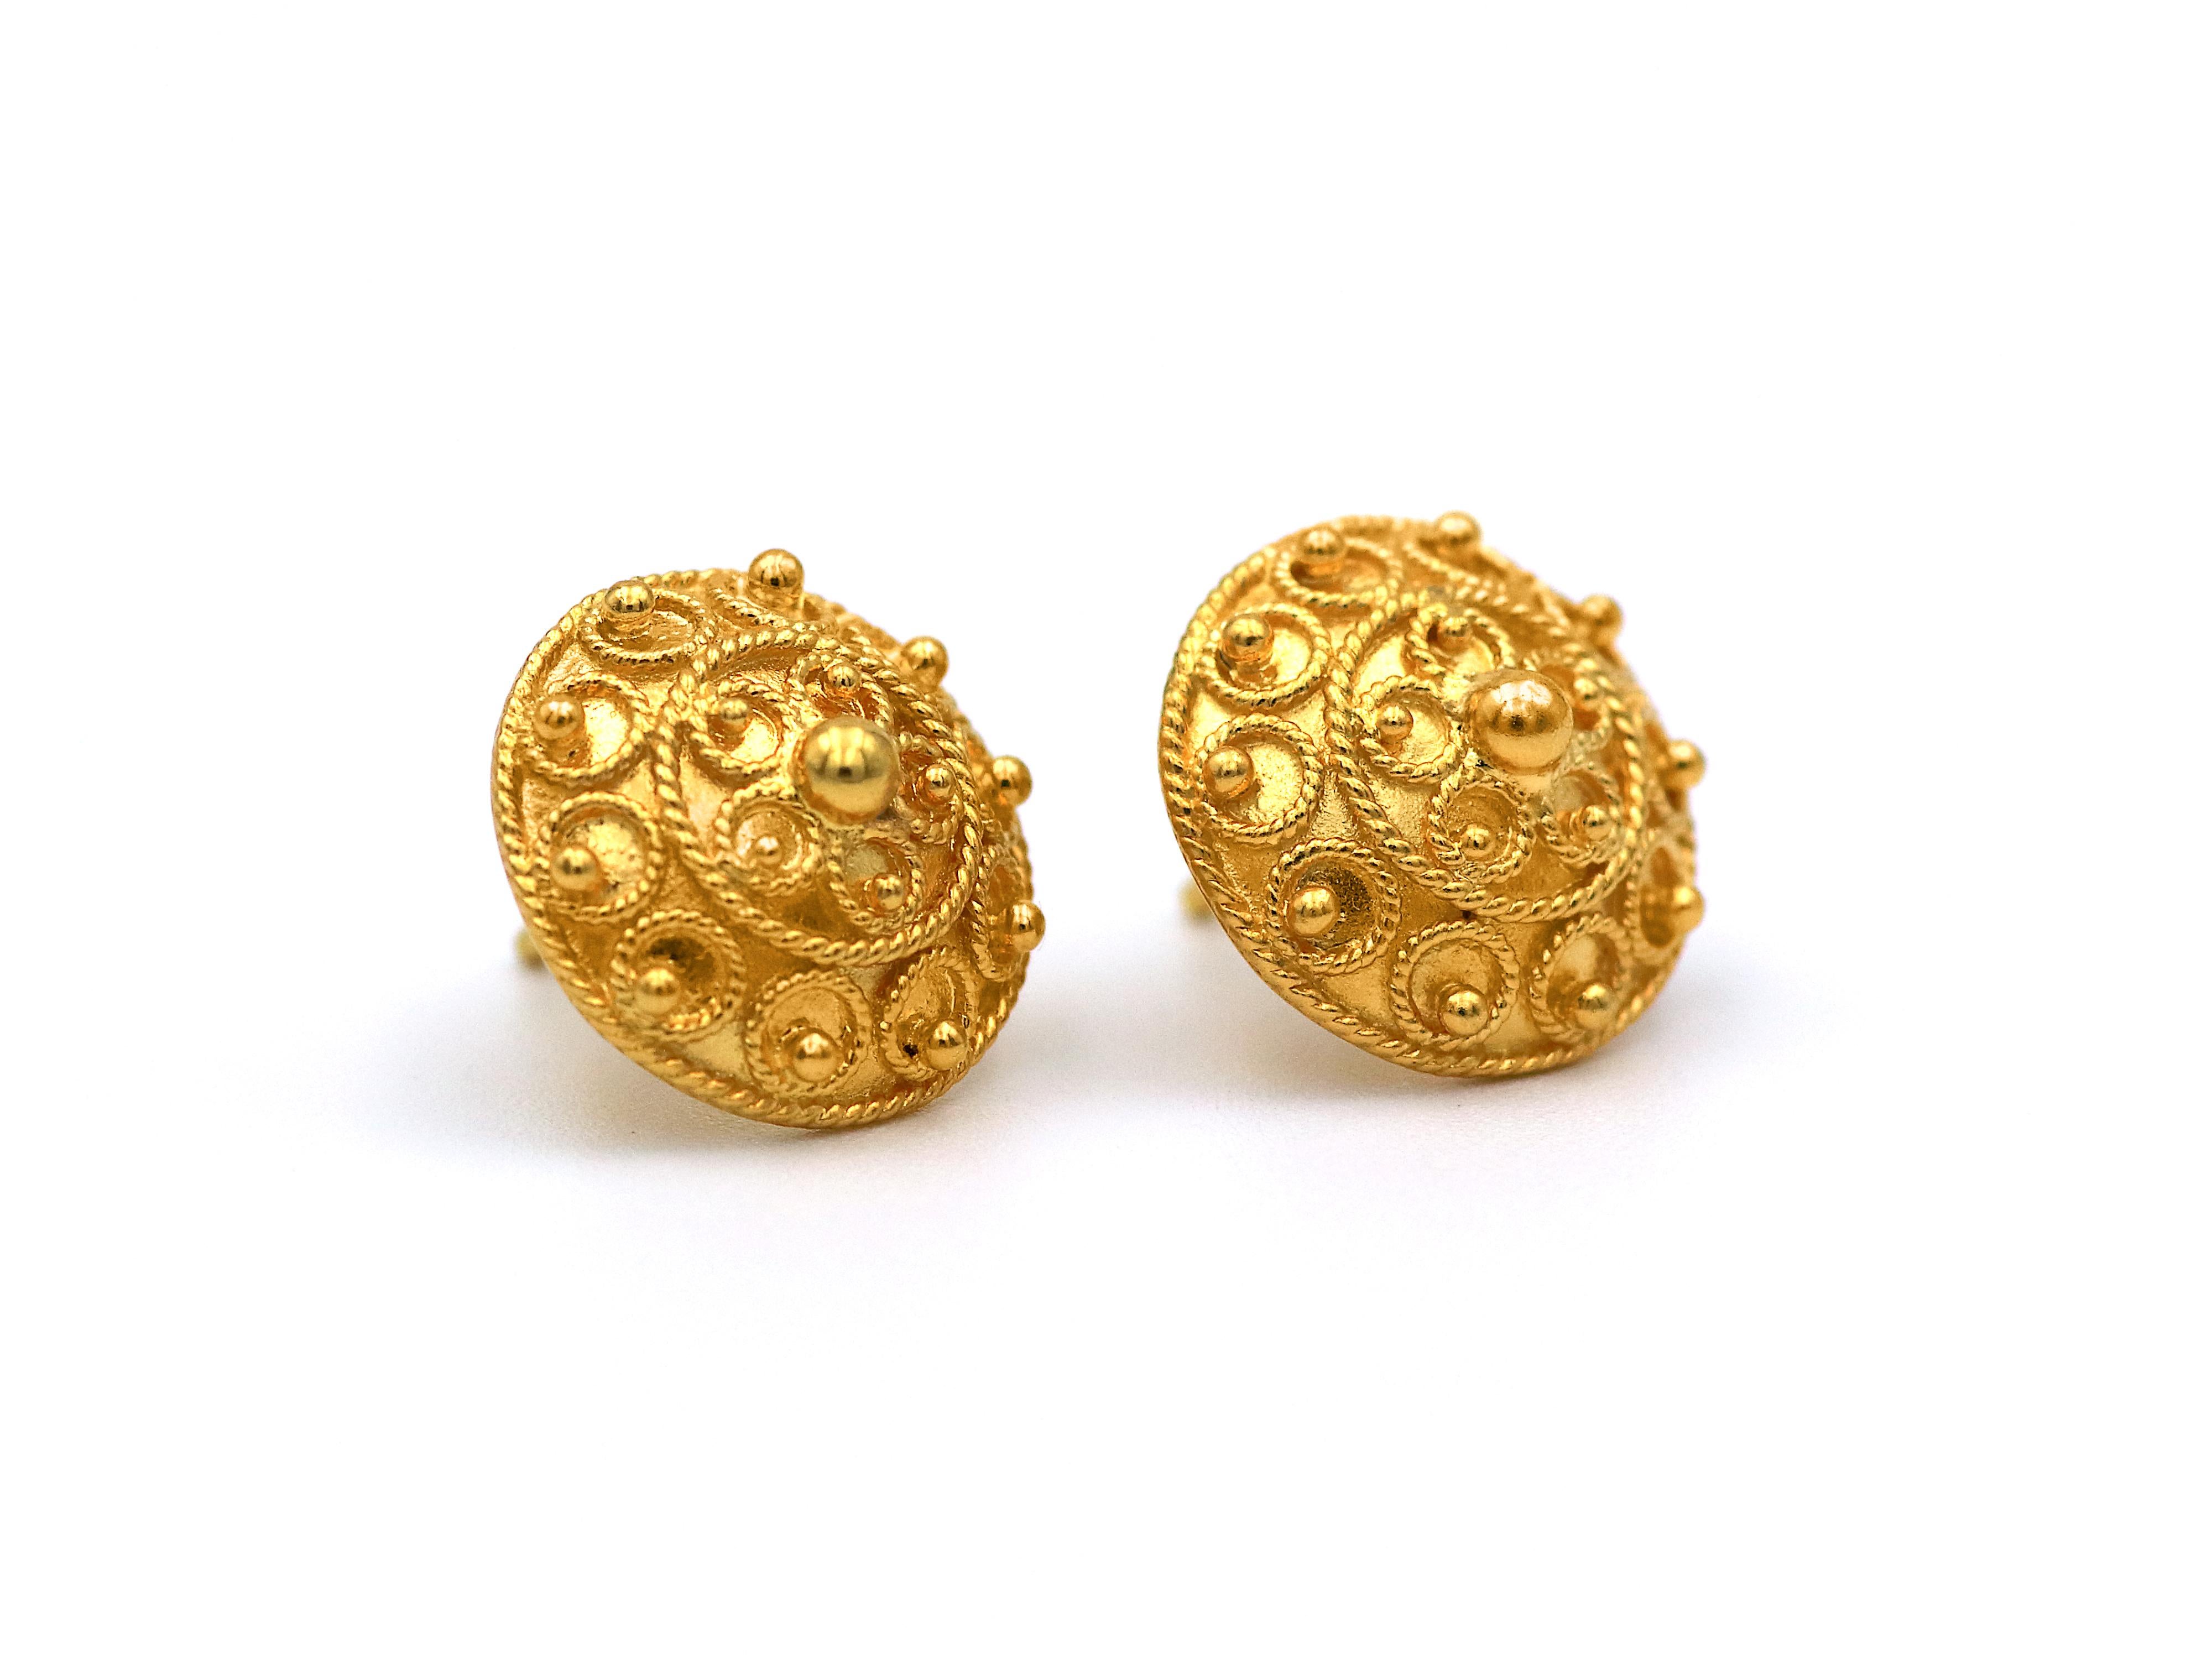 Bocola stud earrings set in 22k yellow gold. The design is created with circles of filigree and topped with granulations of different size all around.  All solid and could be worn daily without worrying.